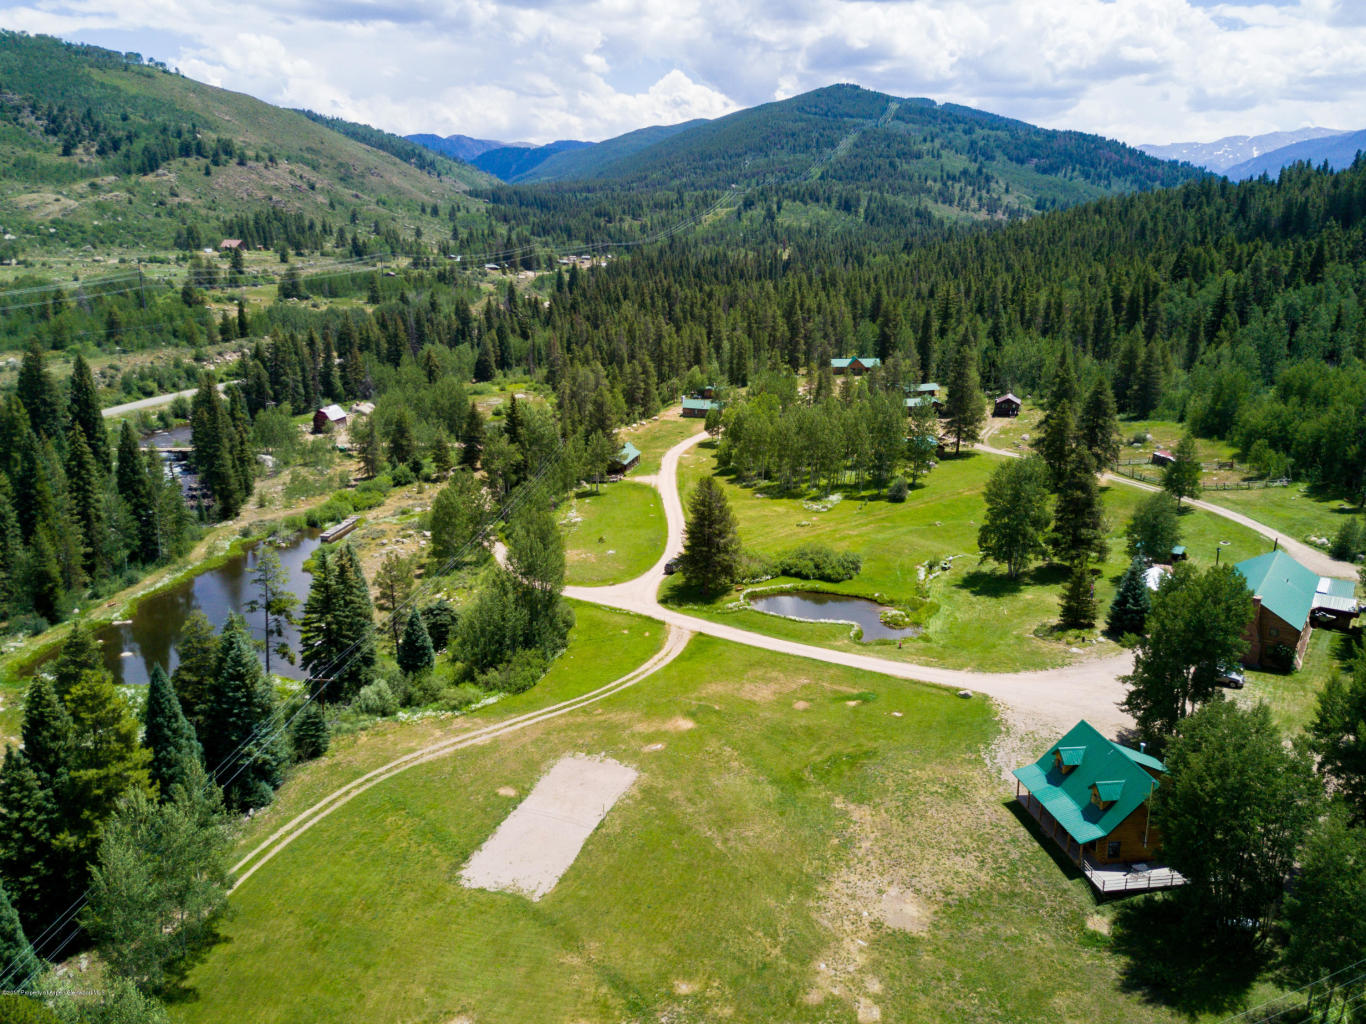 32-acre dude ranch near Aspen sells for $3M; new owners ...